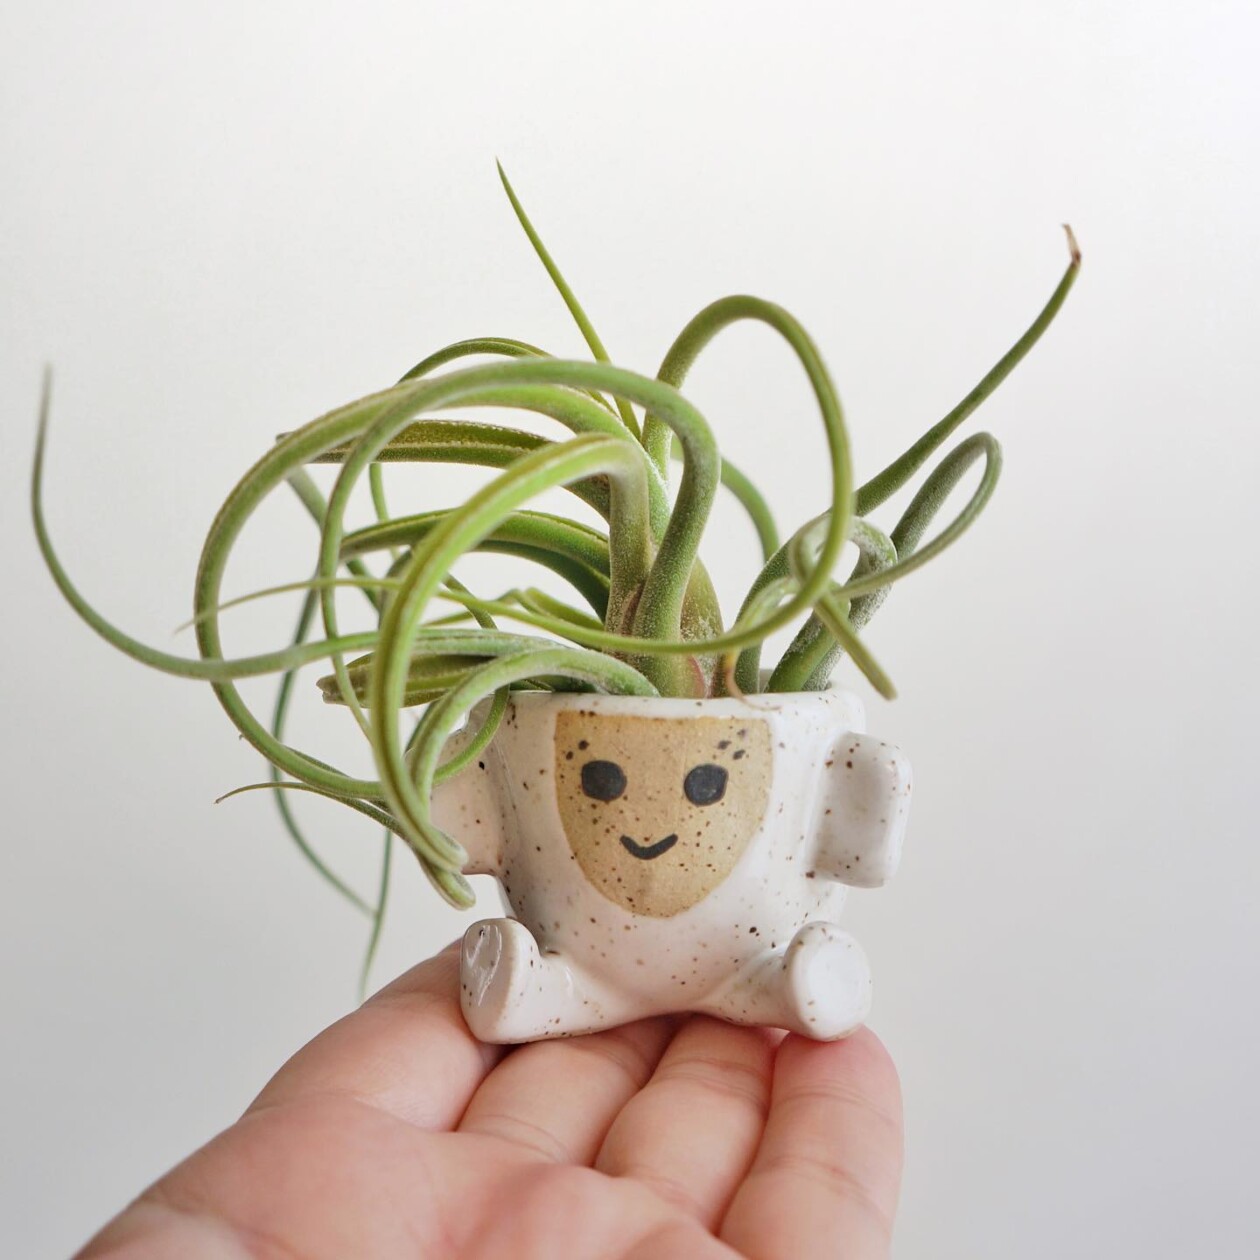 Amusing And Adorable Anthropomorphic Planters By Abby Ozaltug (2)